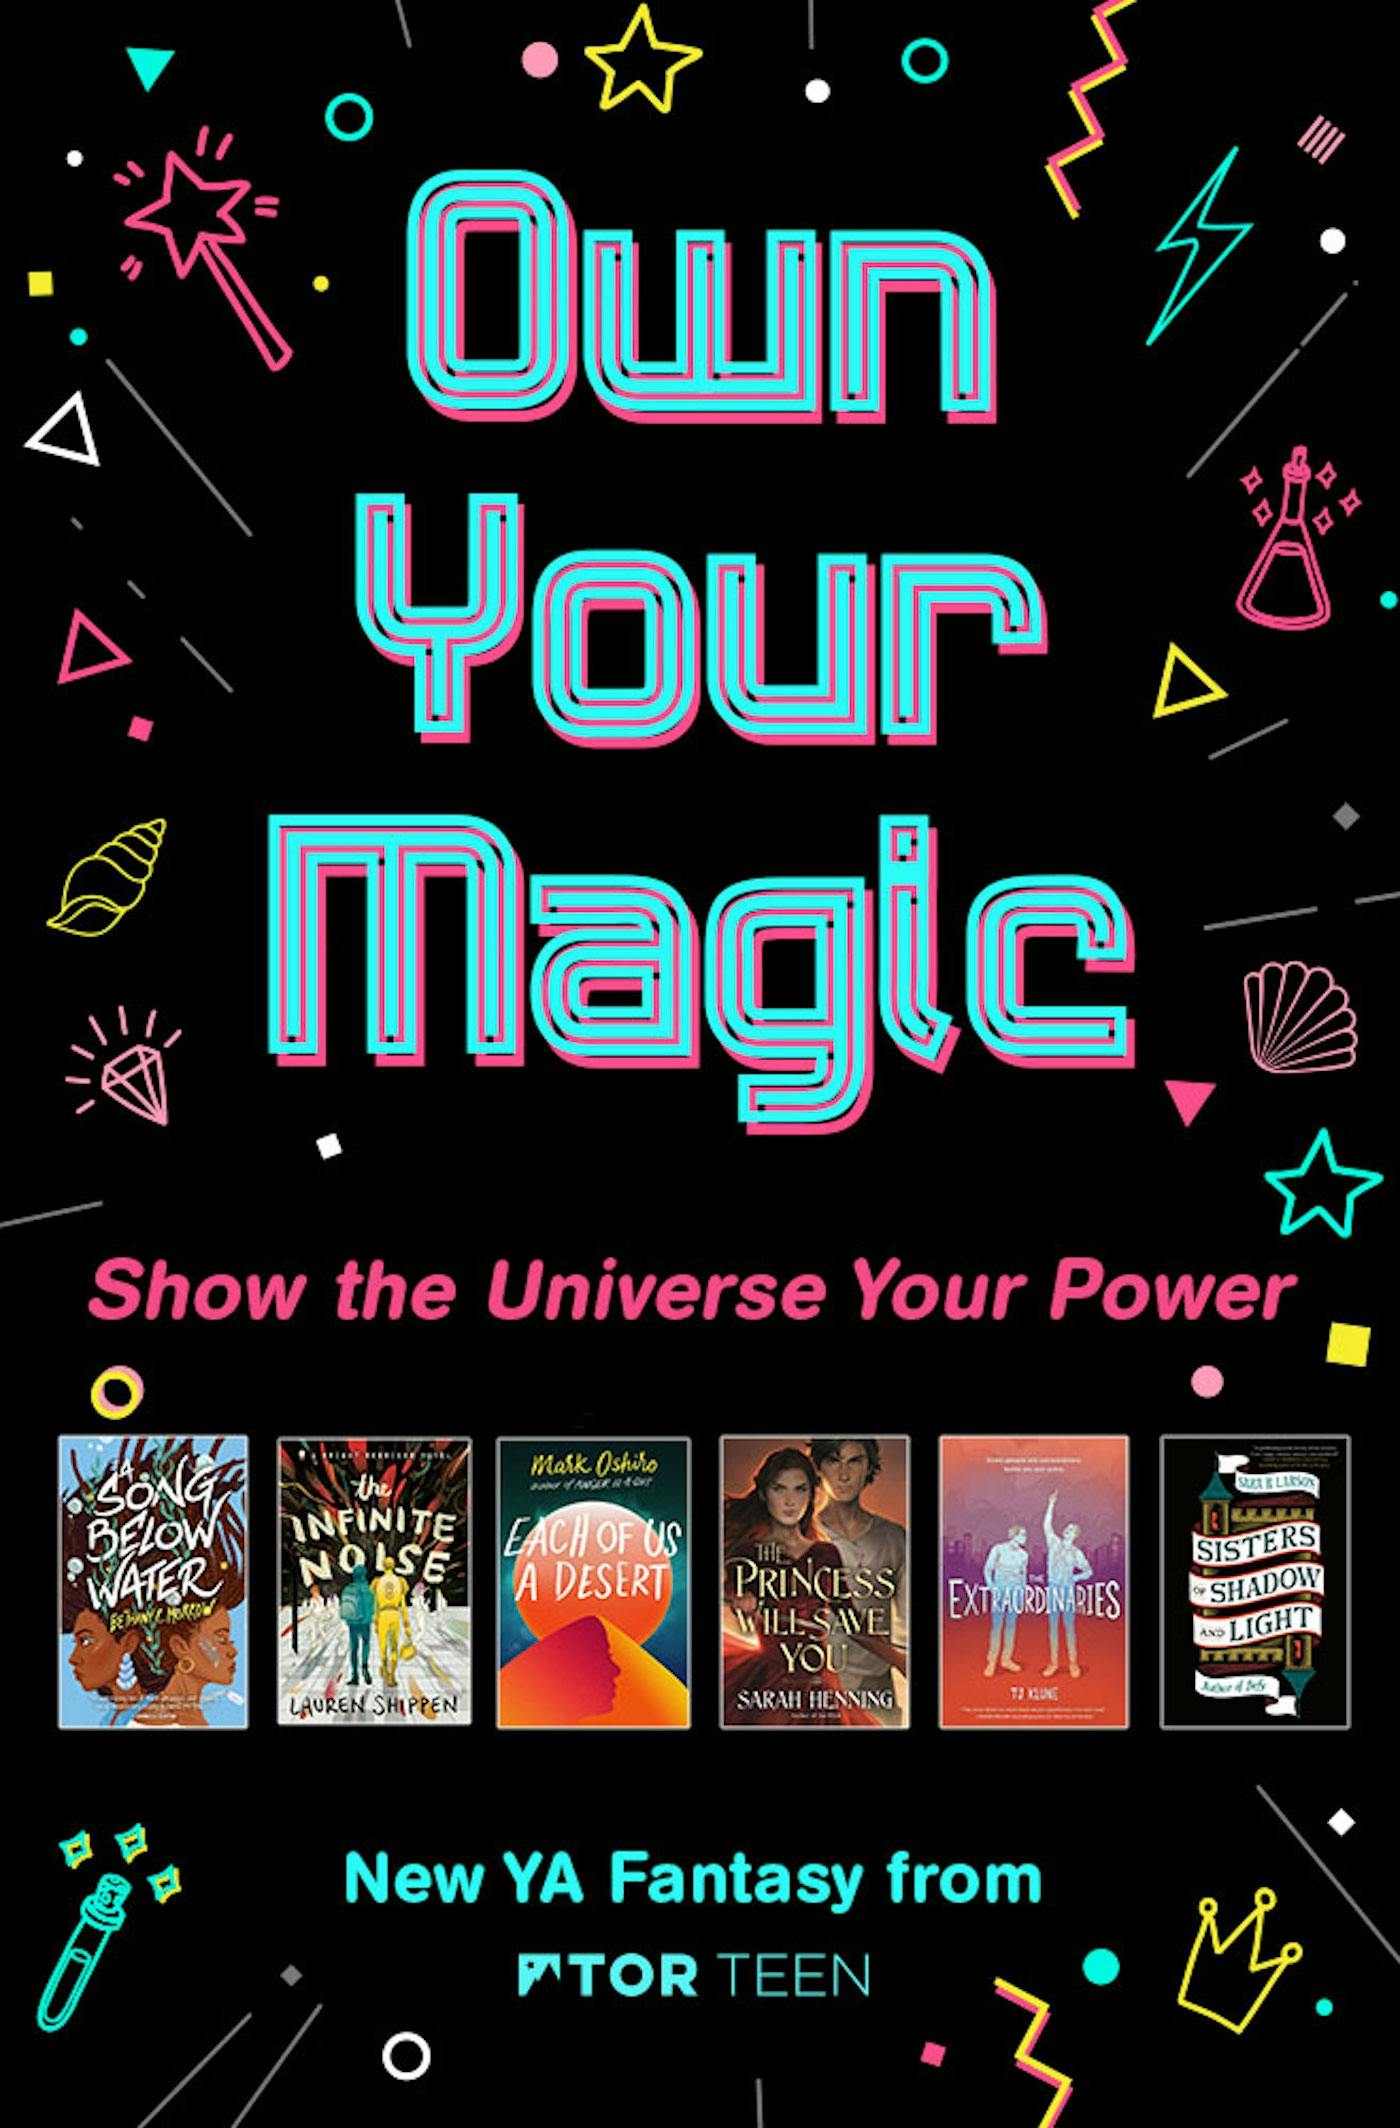 Cover for the book titled as: Own Your Magic Sampler